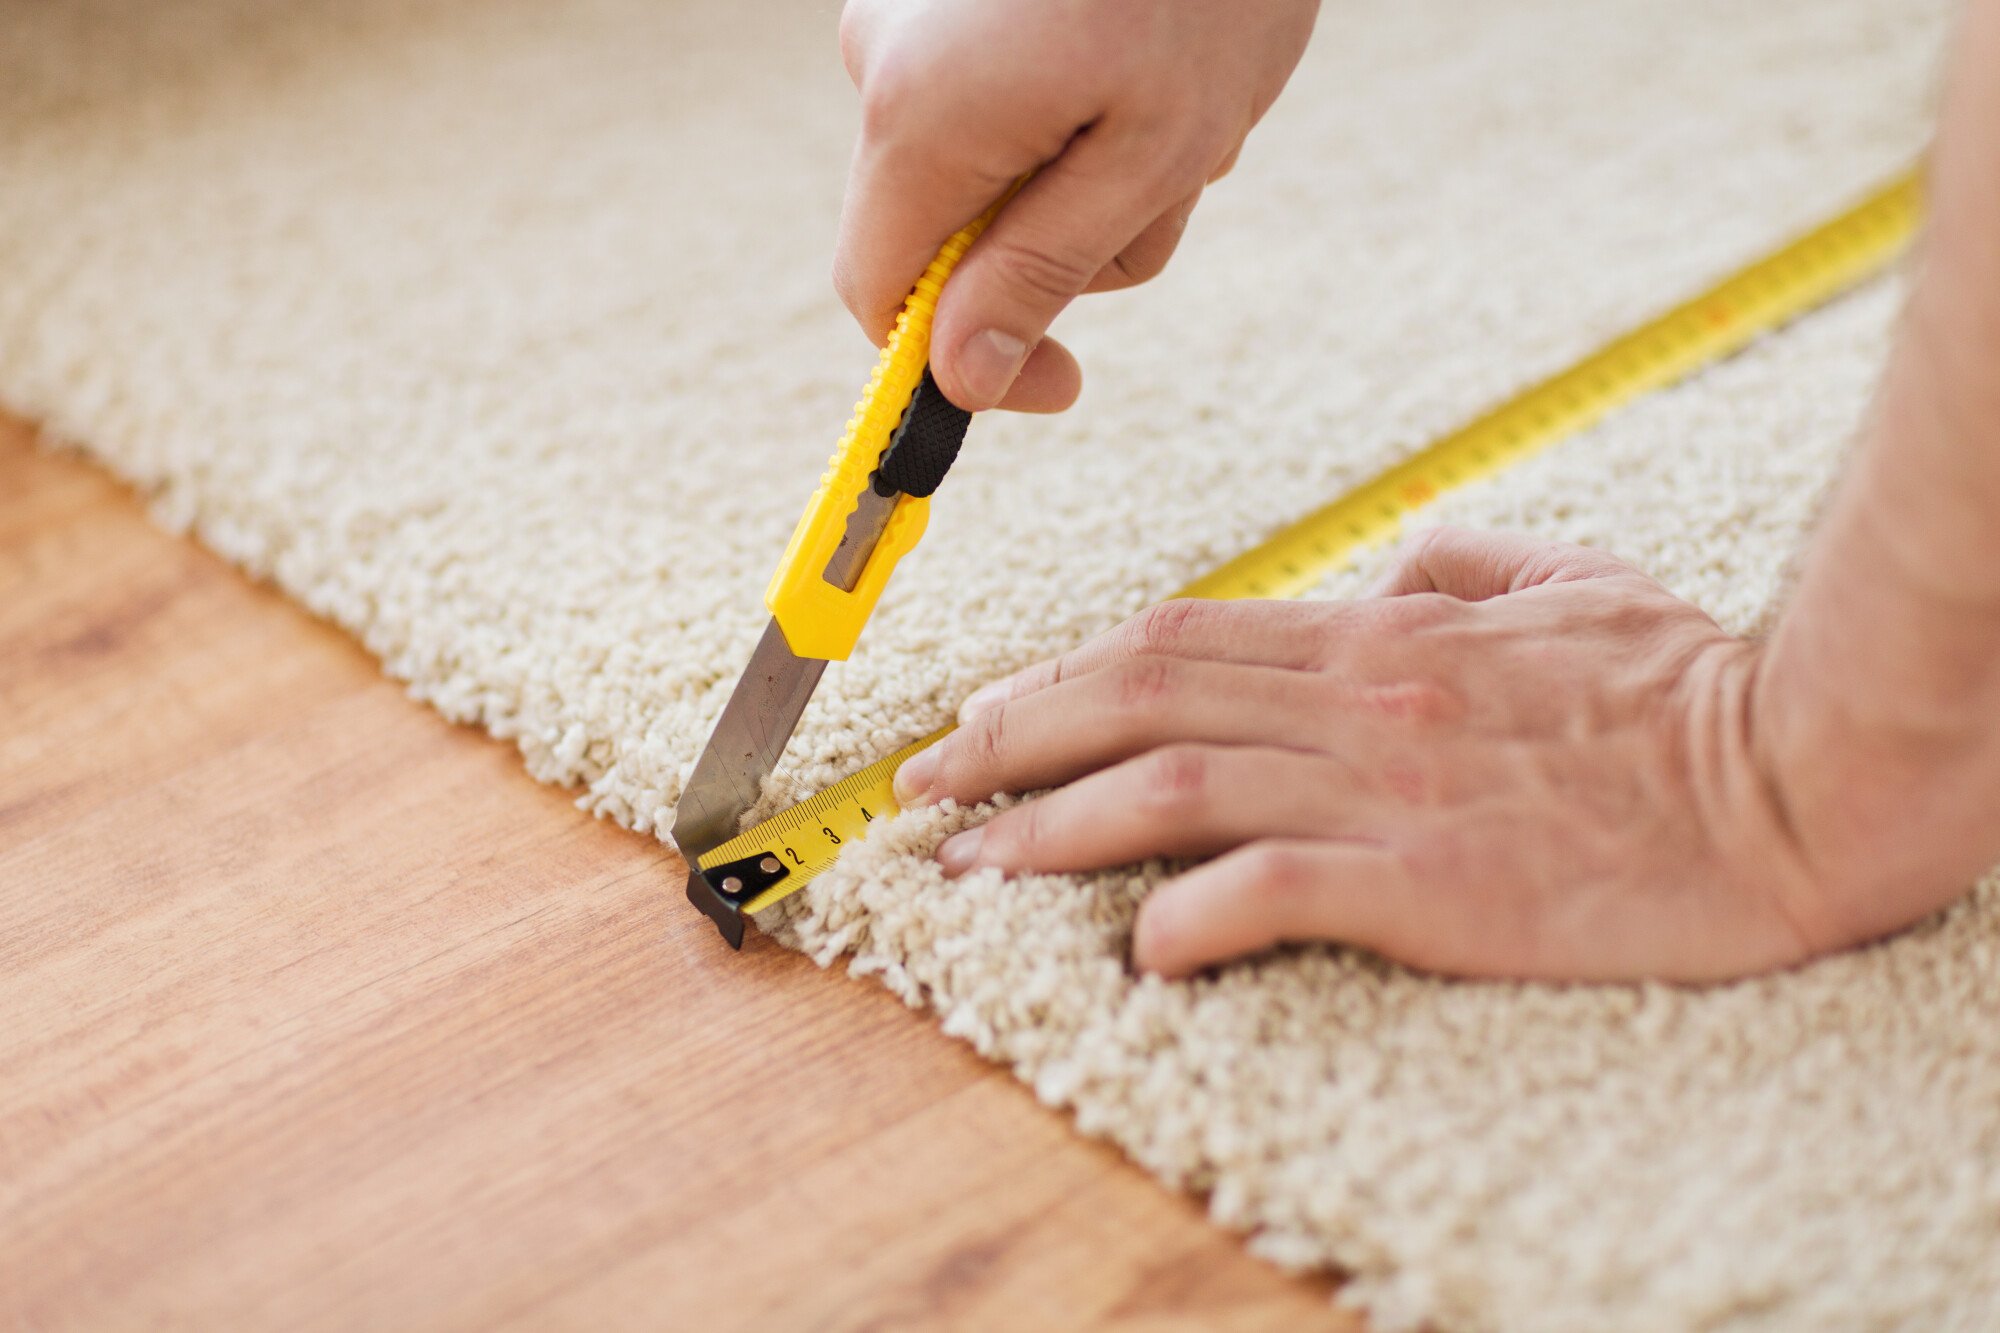 Carpet installation can often be a stressful process, so it's best to leave it to the pros. But do you tip carpet installers? Here's what you need to know.